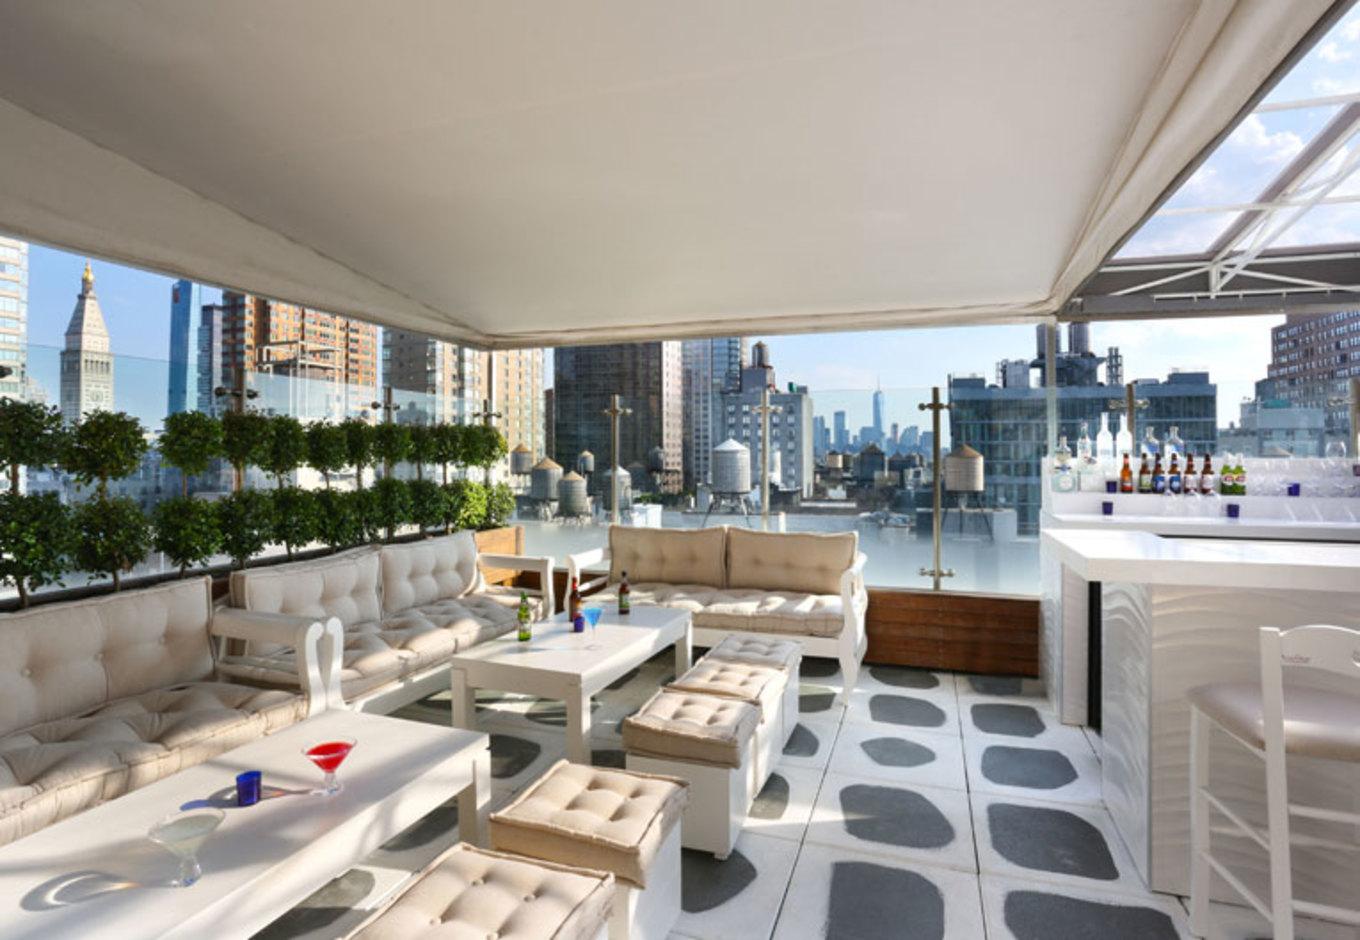 12/6 Rooftop Vibes | Holy Brunch Sundays #RooftopBrunch | NYC skyline view